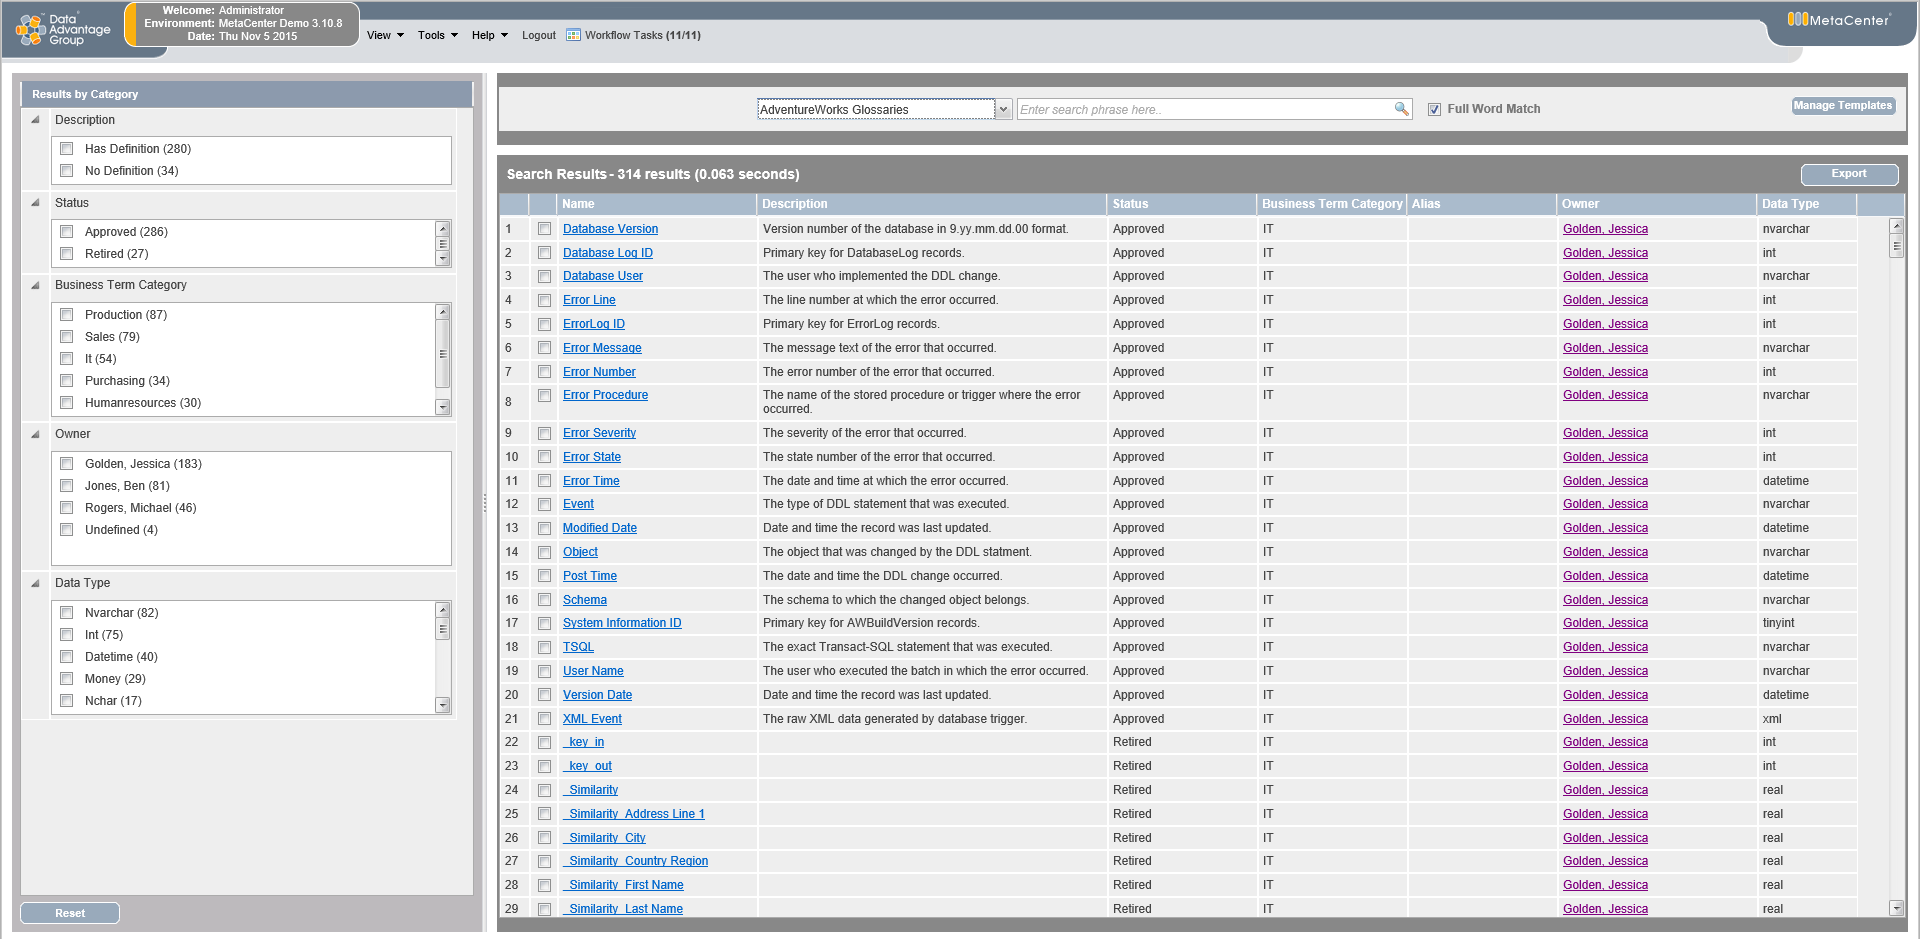 Search Glossary in MetaCenter metadata management solution